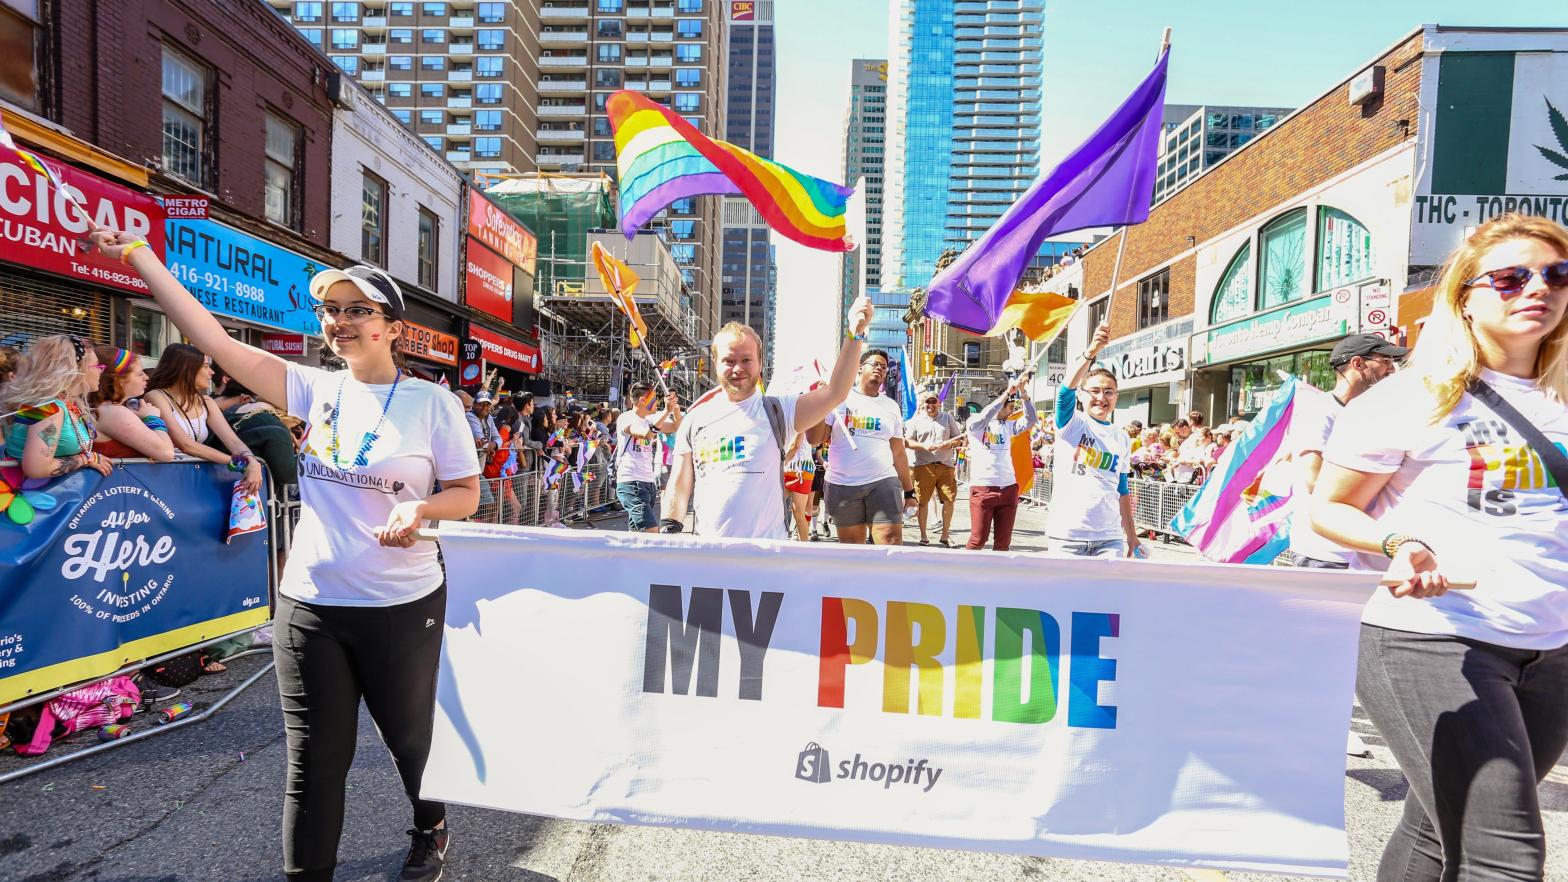 Like so many major companies come Pride Month, Shopify is ready to show their support during events like the 2017 Toronto Pride Parade. Still, the company has a very mum response as LGBTQ advocates asks the company to put its money where its mouth is. (Photo: Shawn Goldberg, Shutterstock)